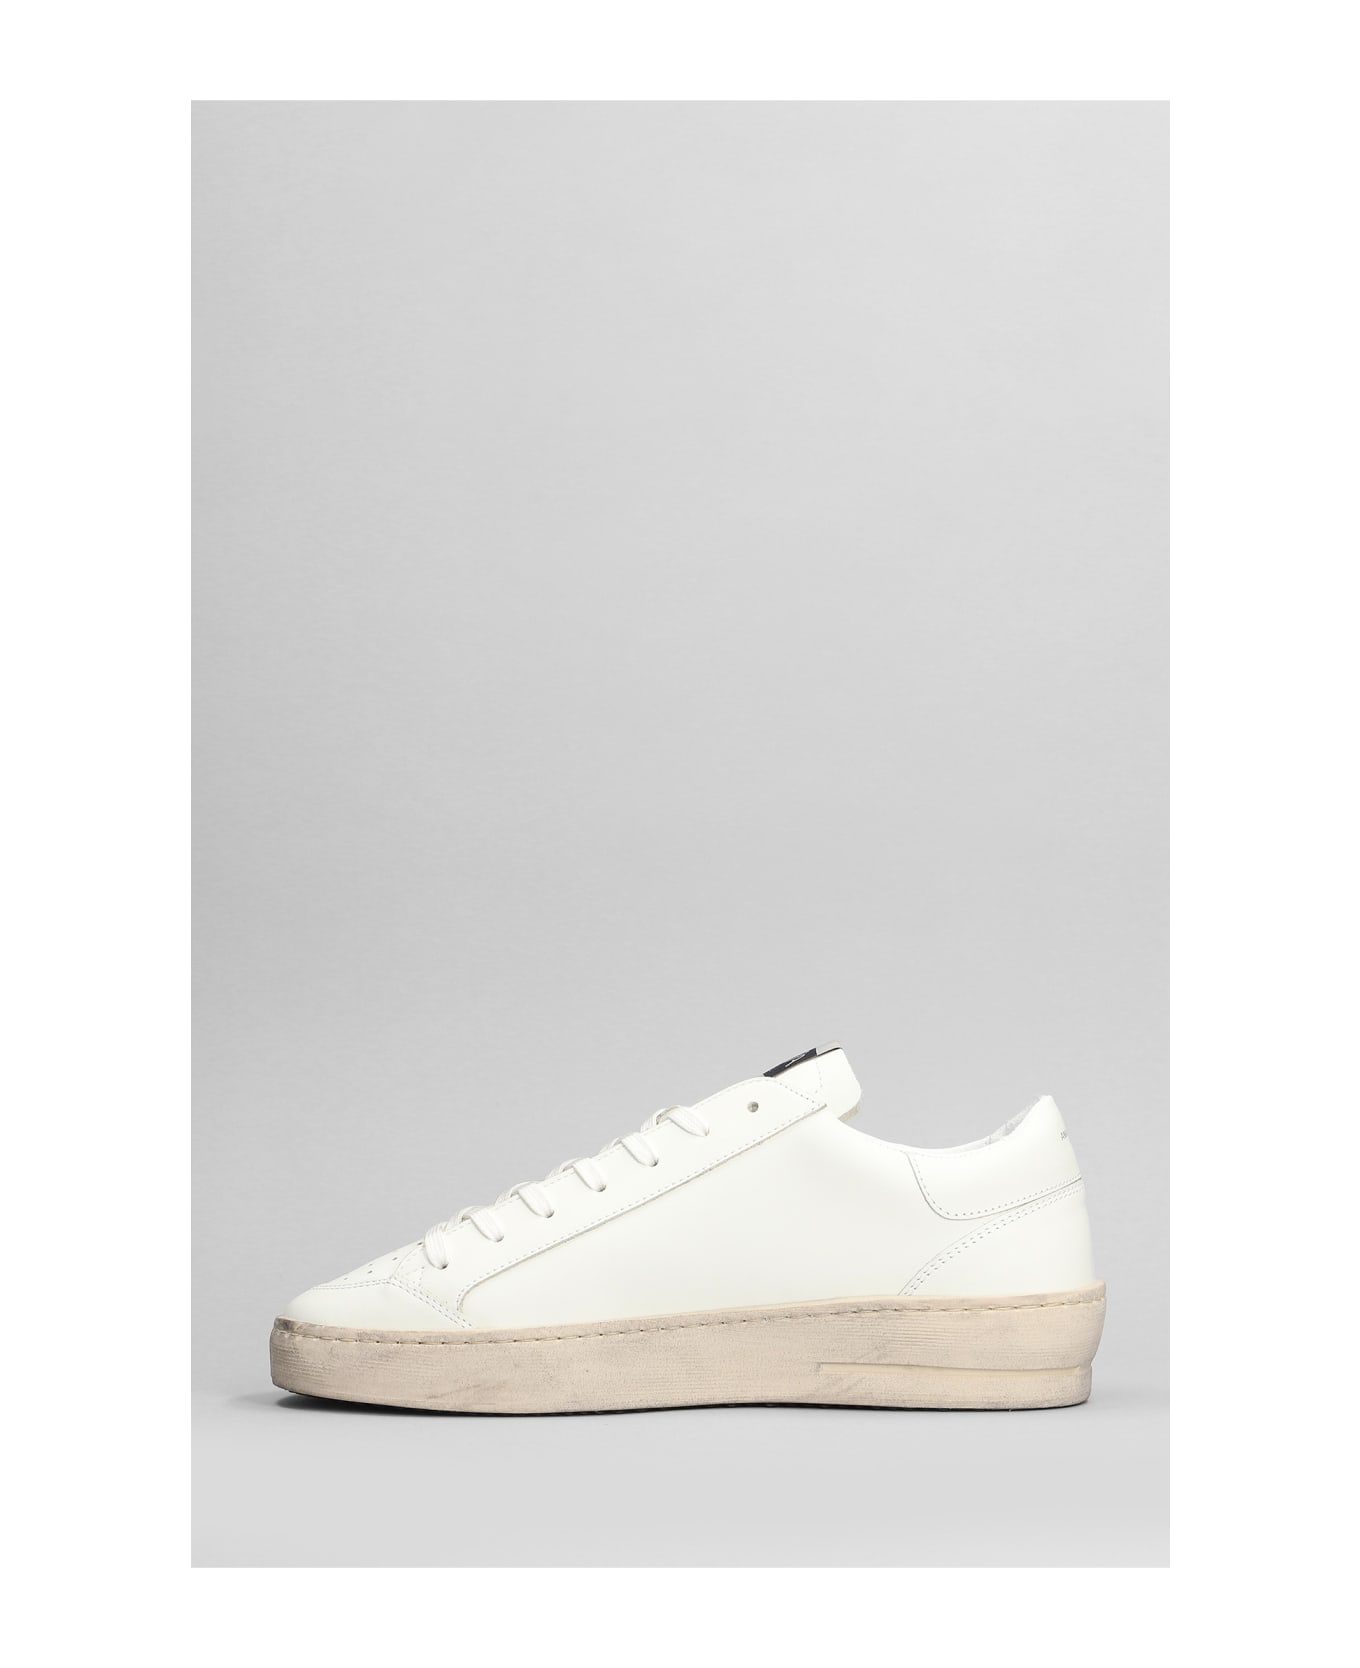 AMA-BRAND Sneakers In White Leather - white